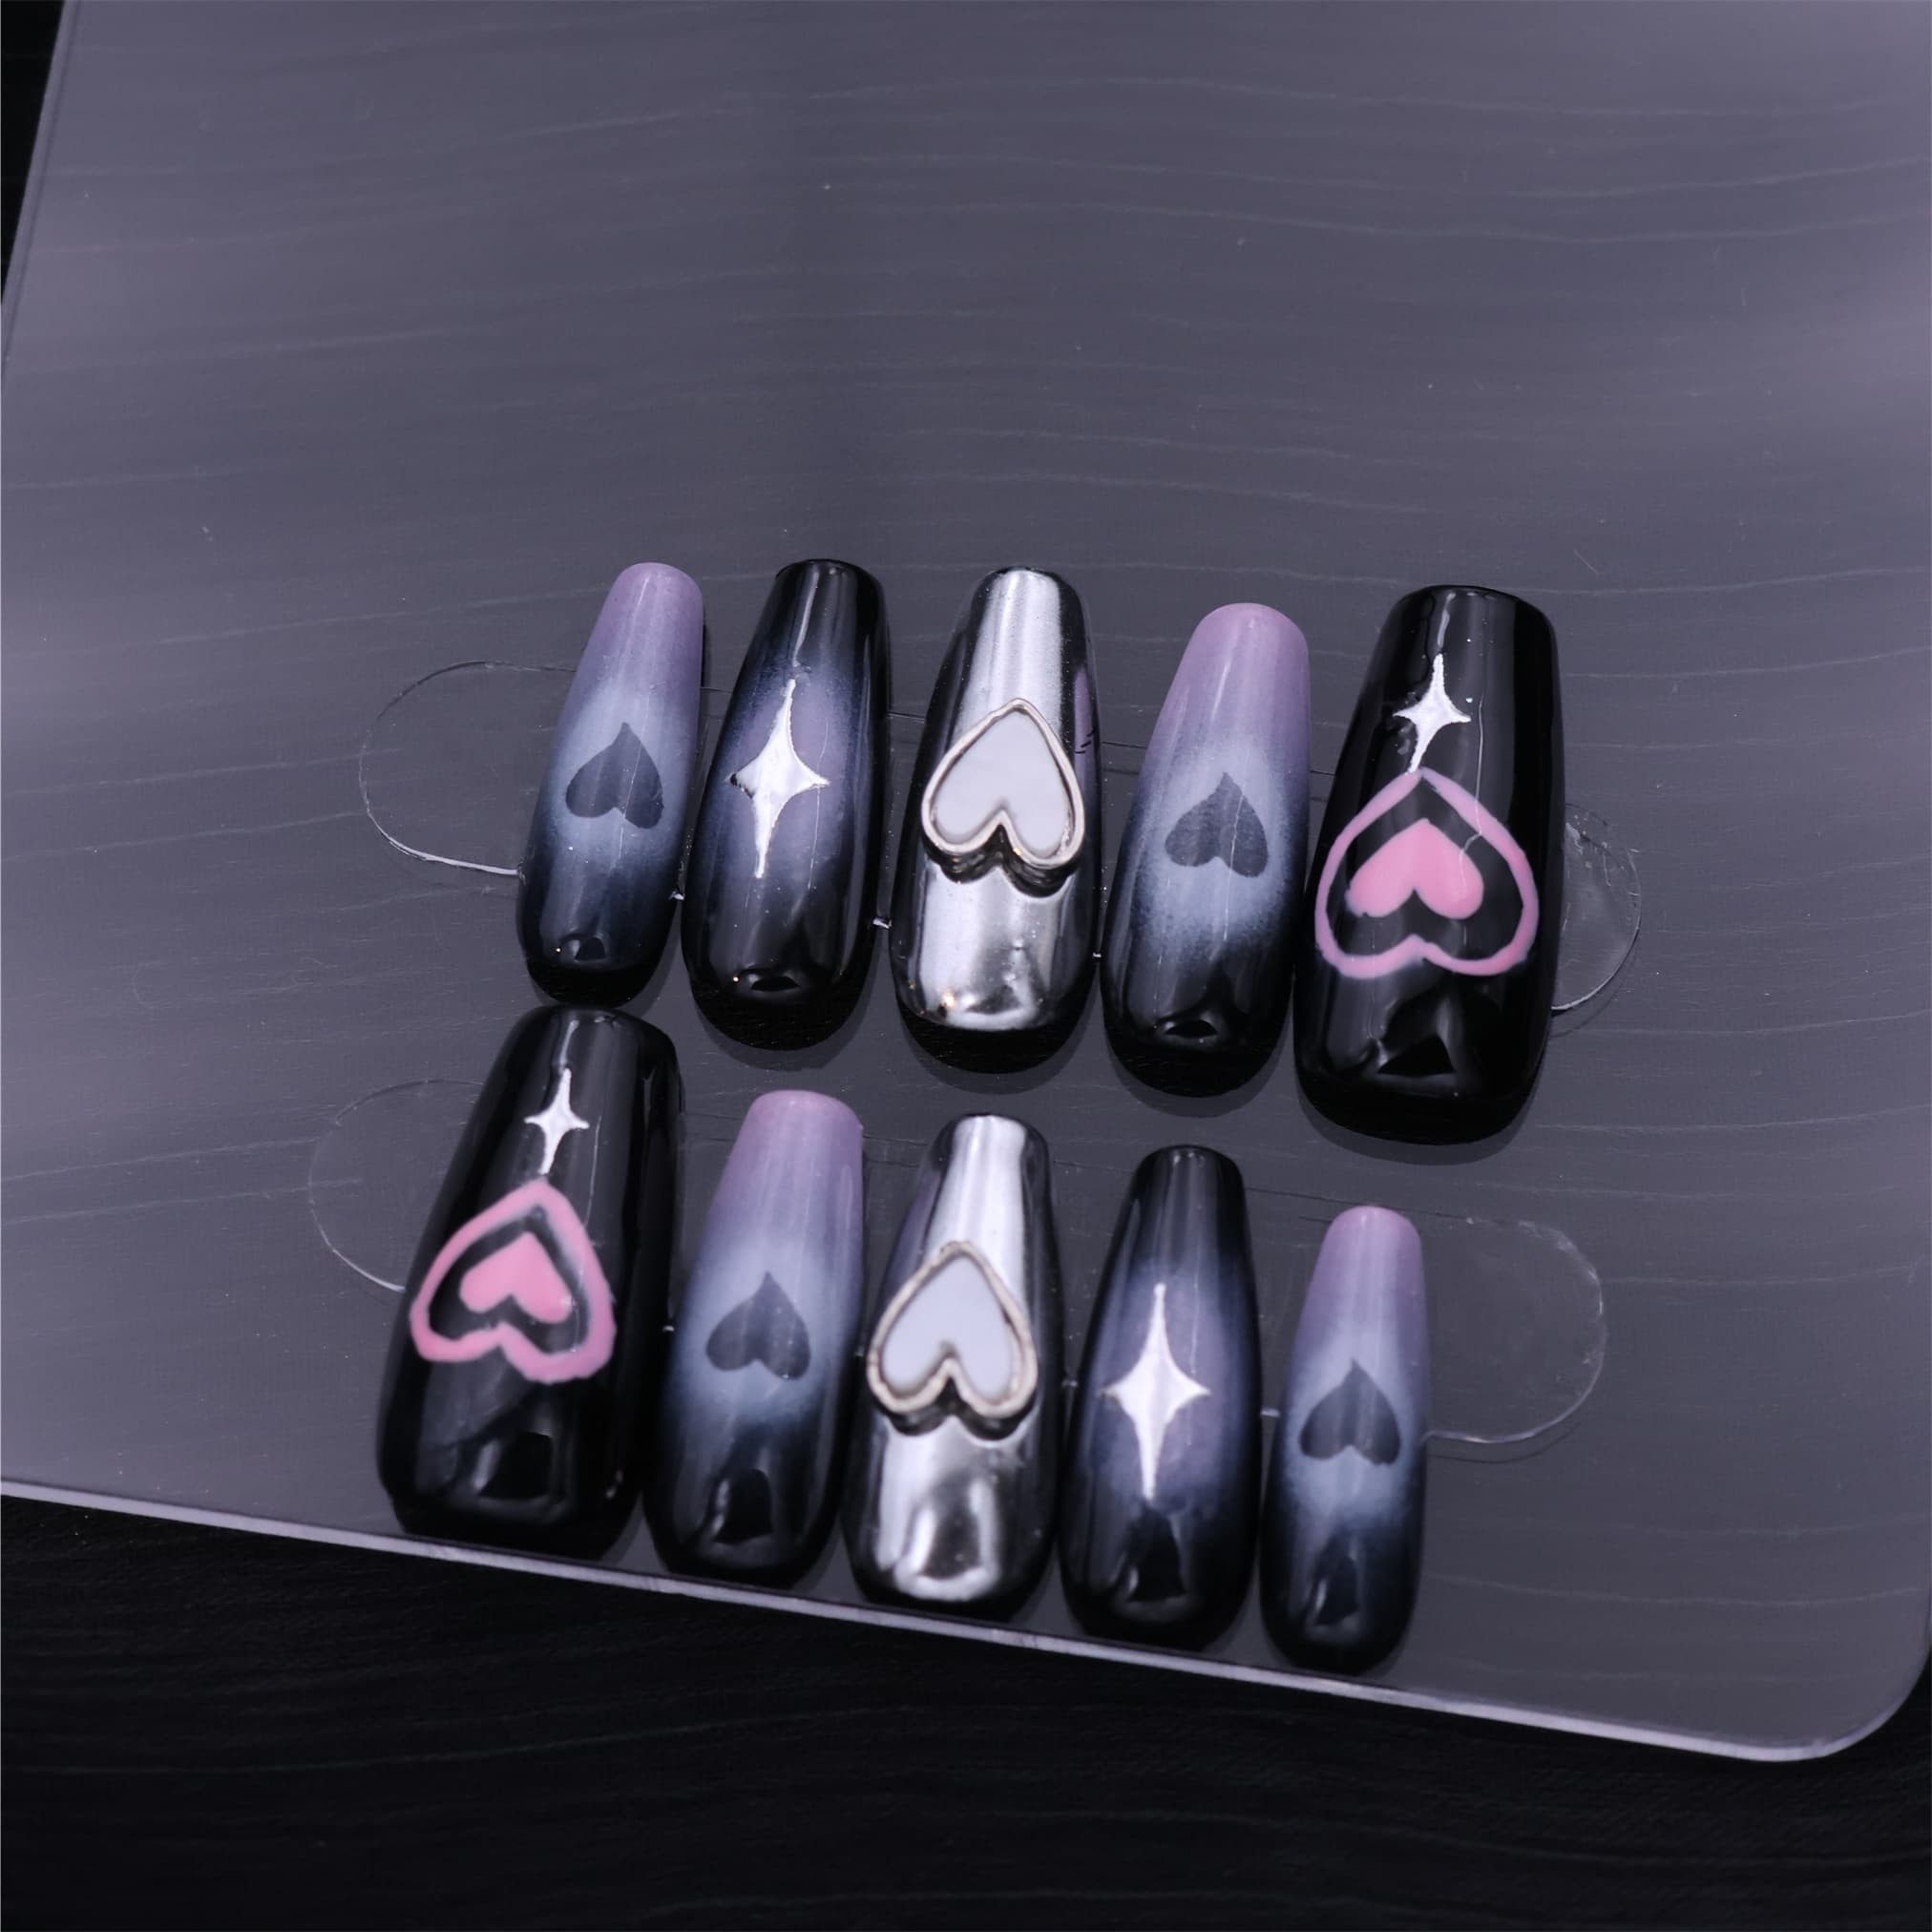 With their Medium Long Coffin press on nails design